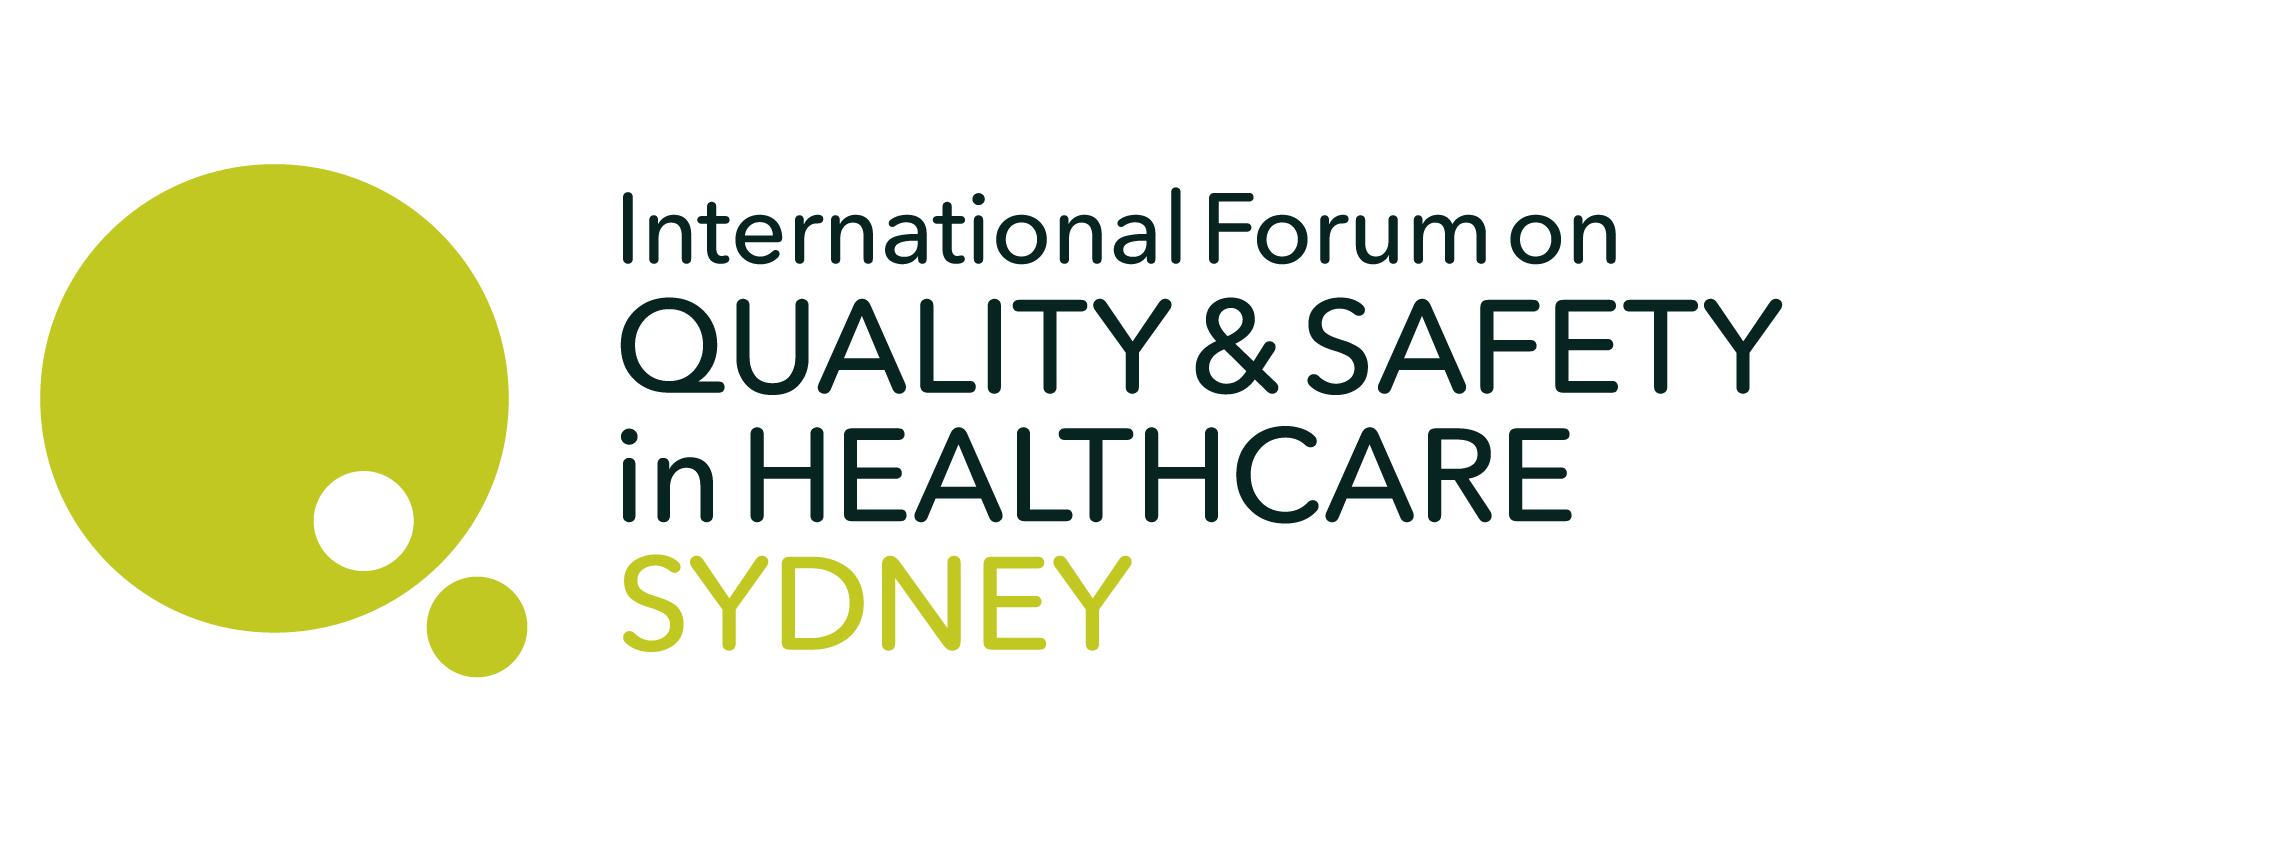 International Forum on Quality and Safety in Healthcare Sydney 2022